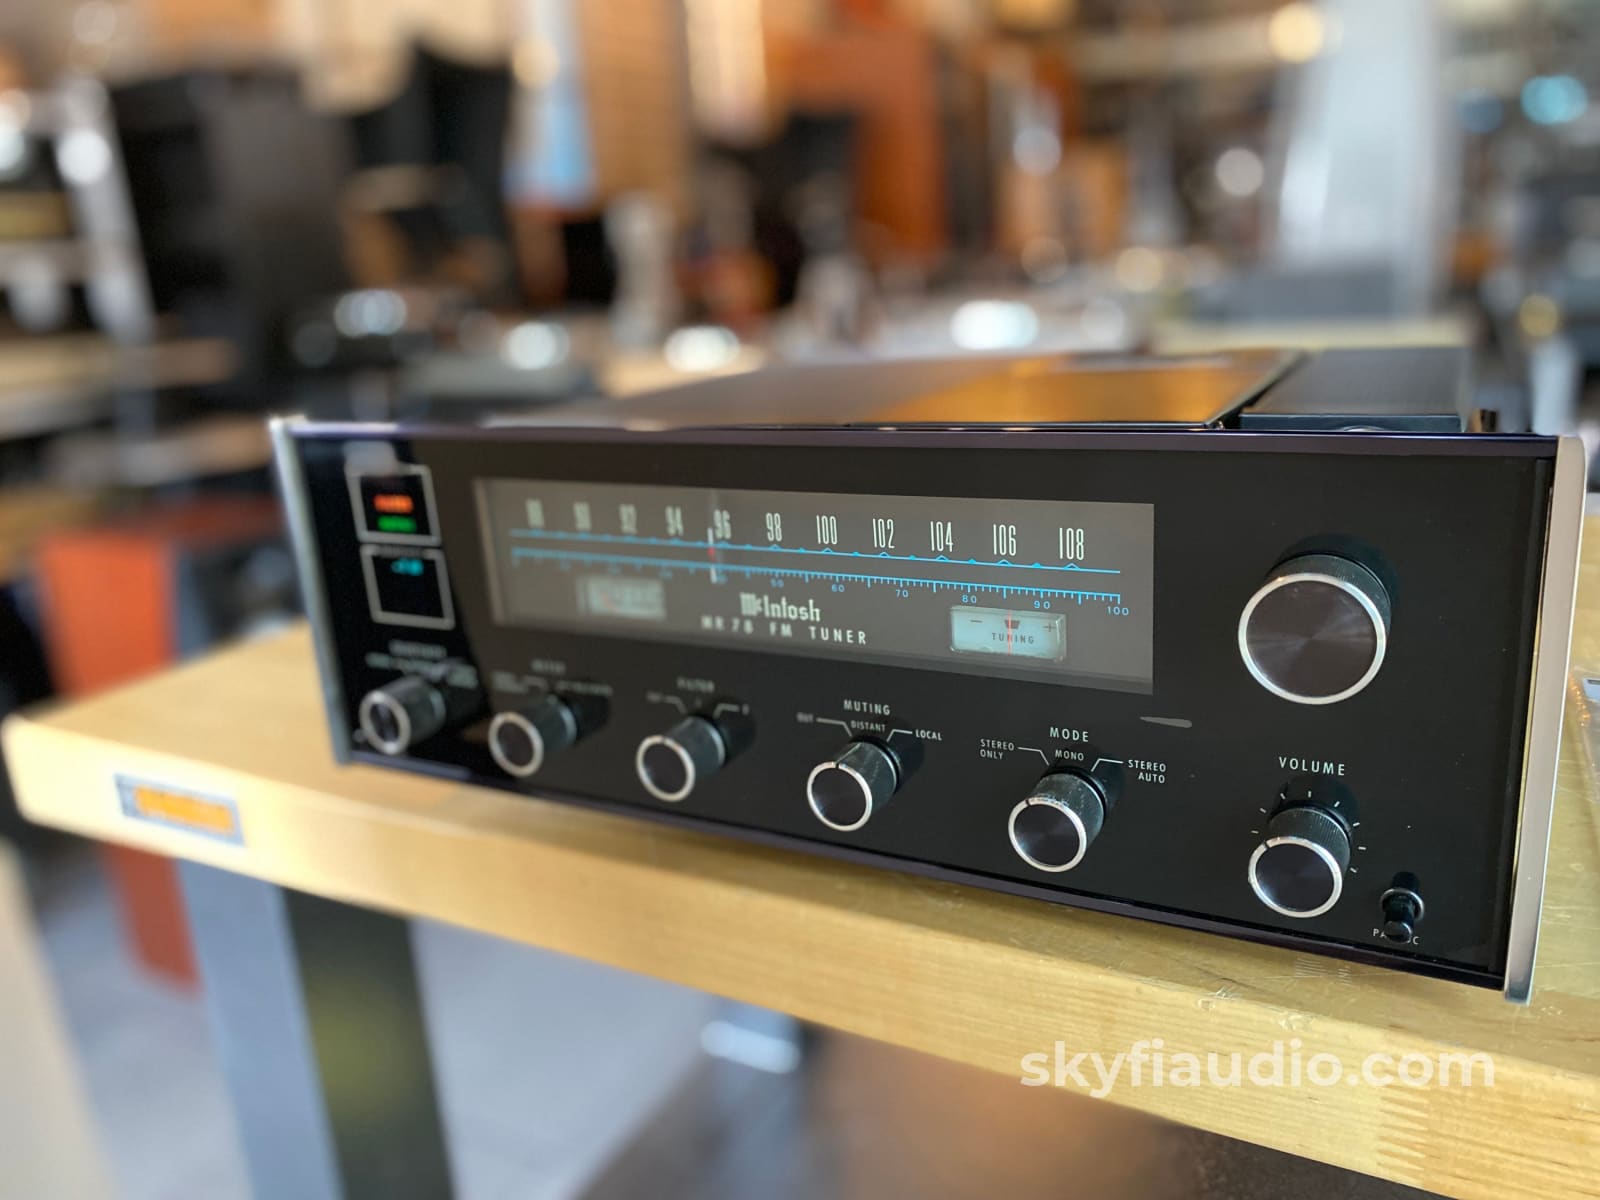 Mcintosh Mr78 Analog Tuner - The Best From